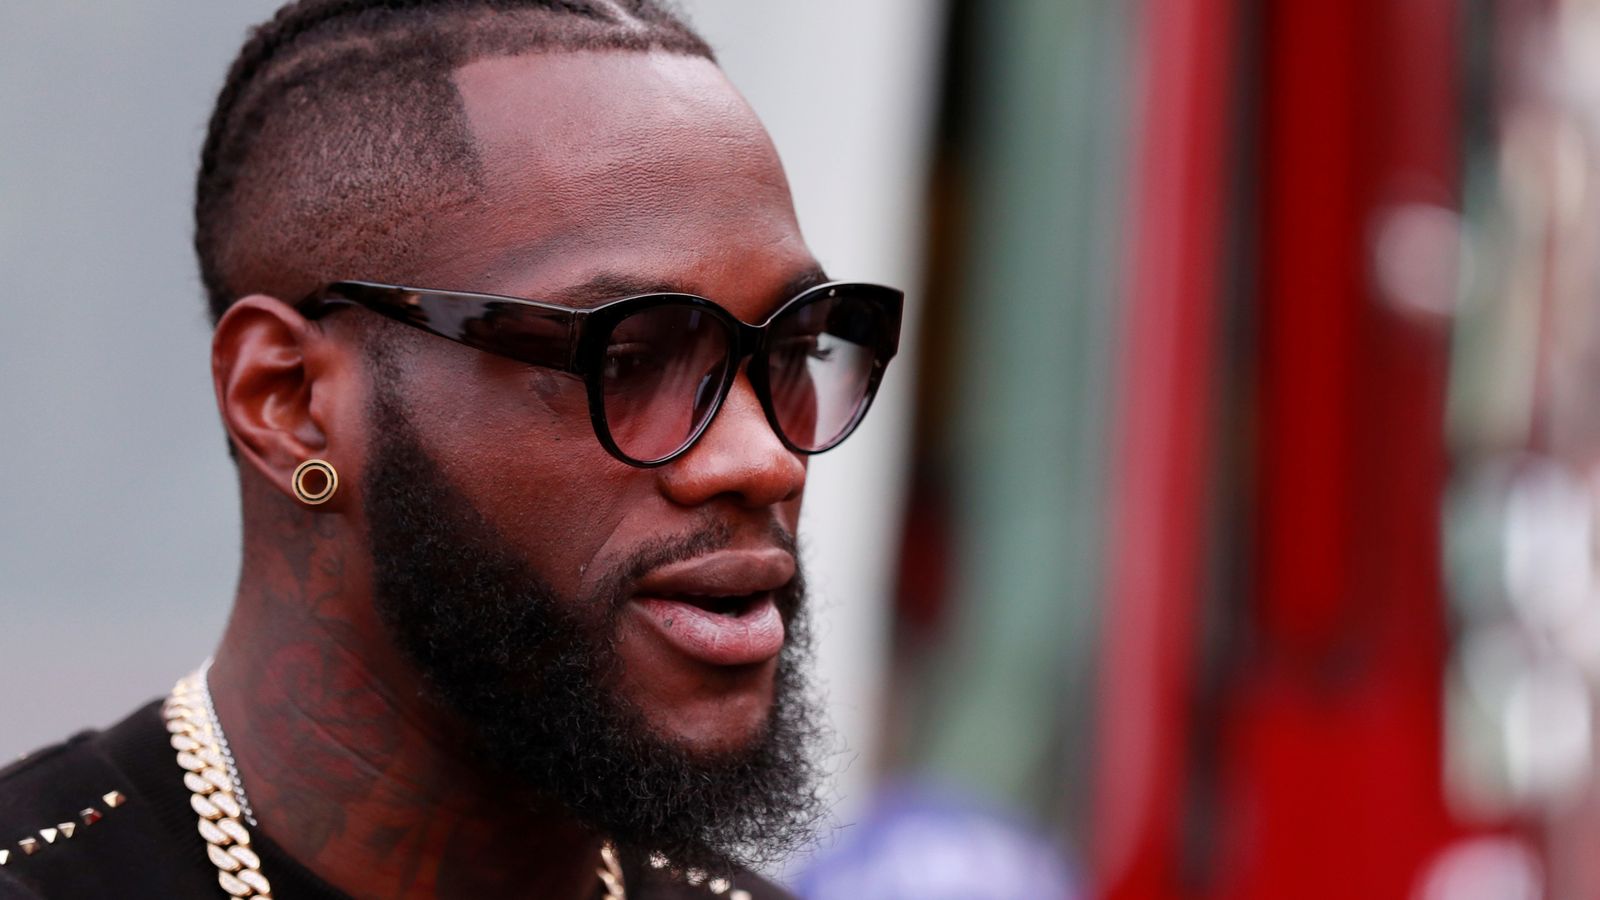 Deontay Wilder: Arrested boxer 'rather be safe than sorry' after gun allegedly found in car